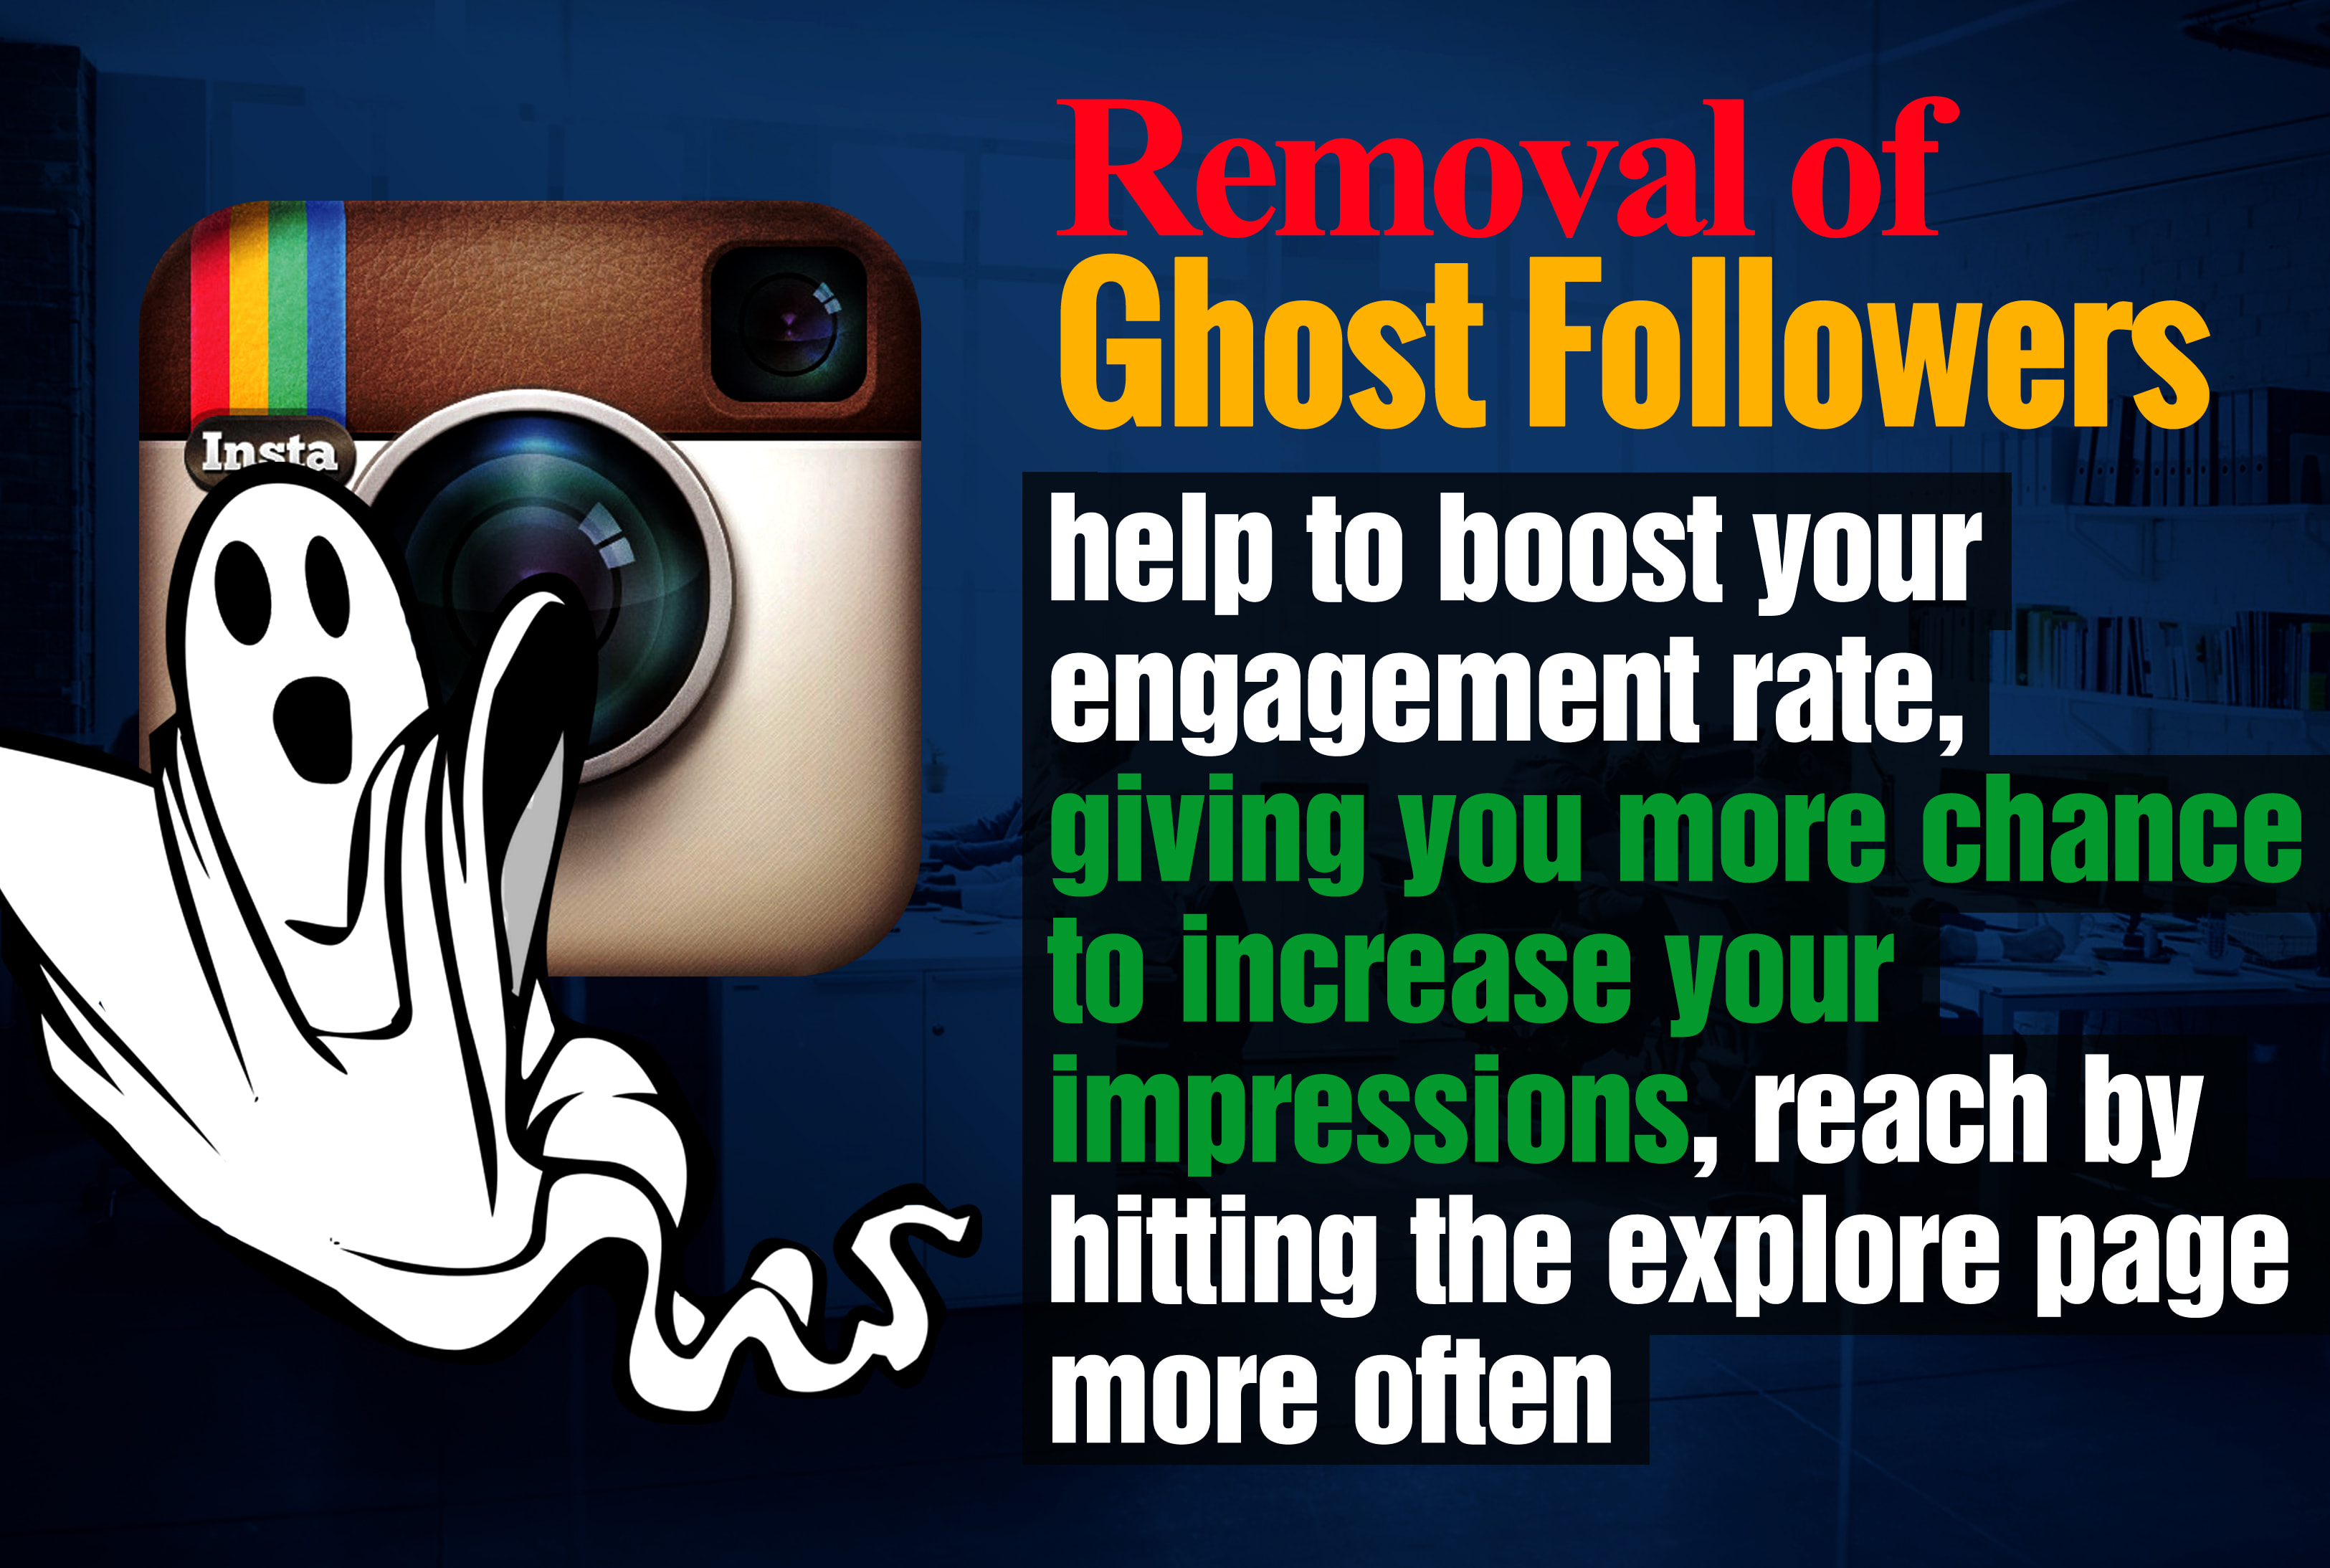  - how to get rid of ghost followers on instagram free